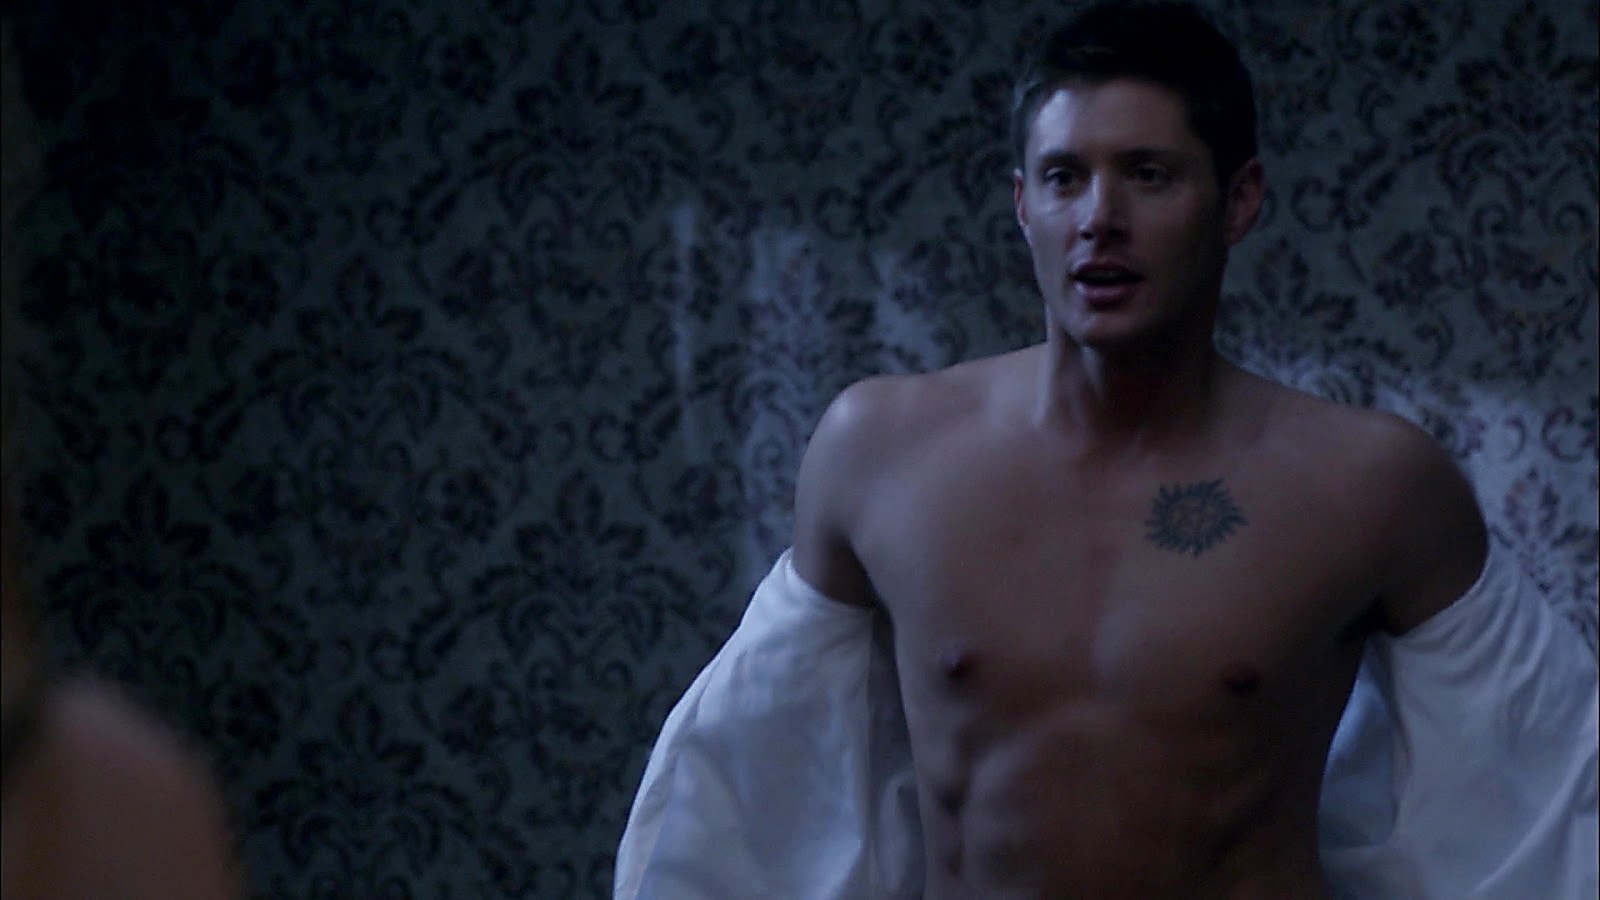 “Jensen Ackles Shirtless in Supernatural S07E13 https://t.co/Th1J8CiJO8 #WC...